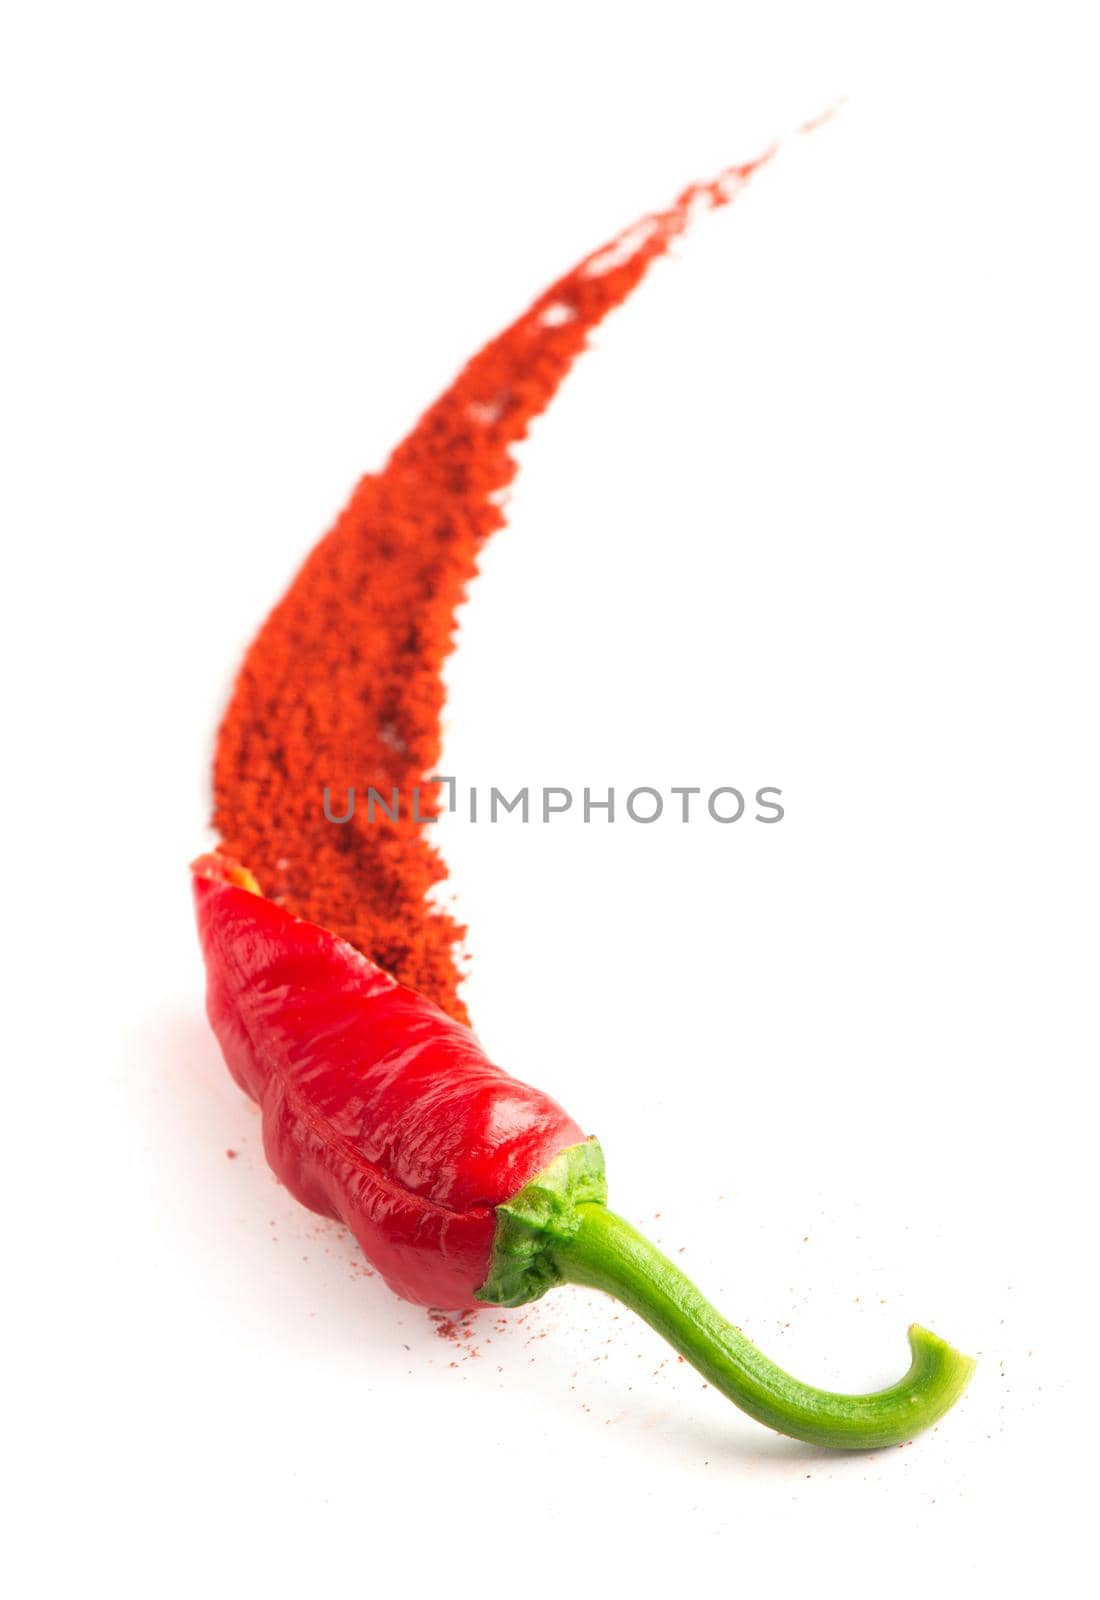 Red hot chilies with powder over white background by aprilphoto